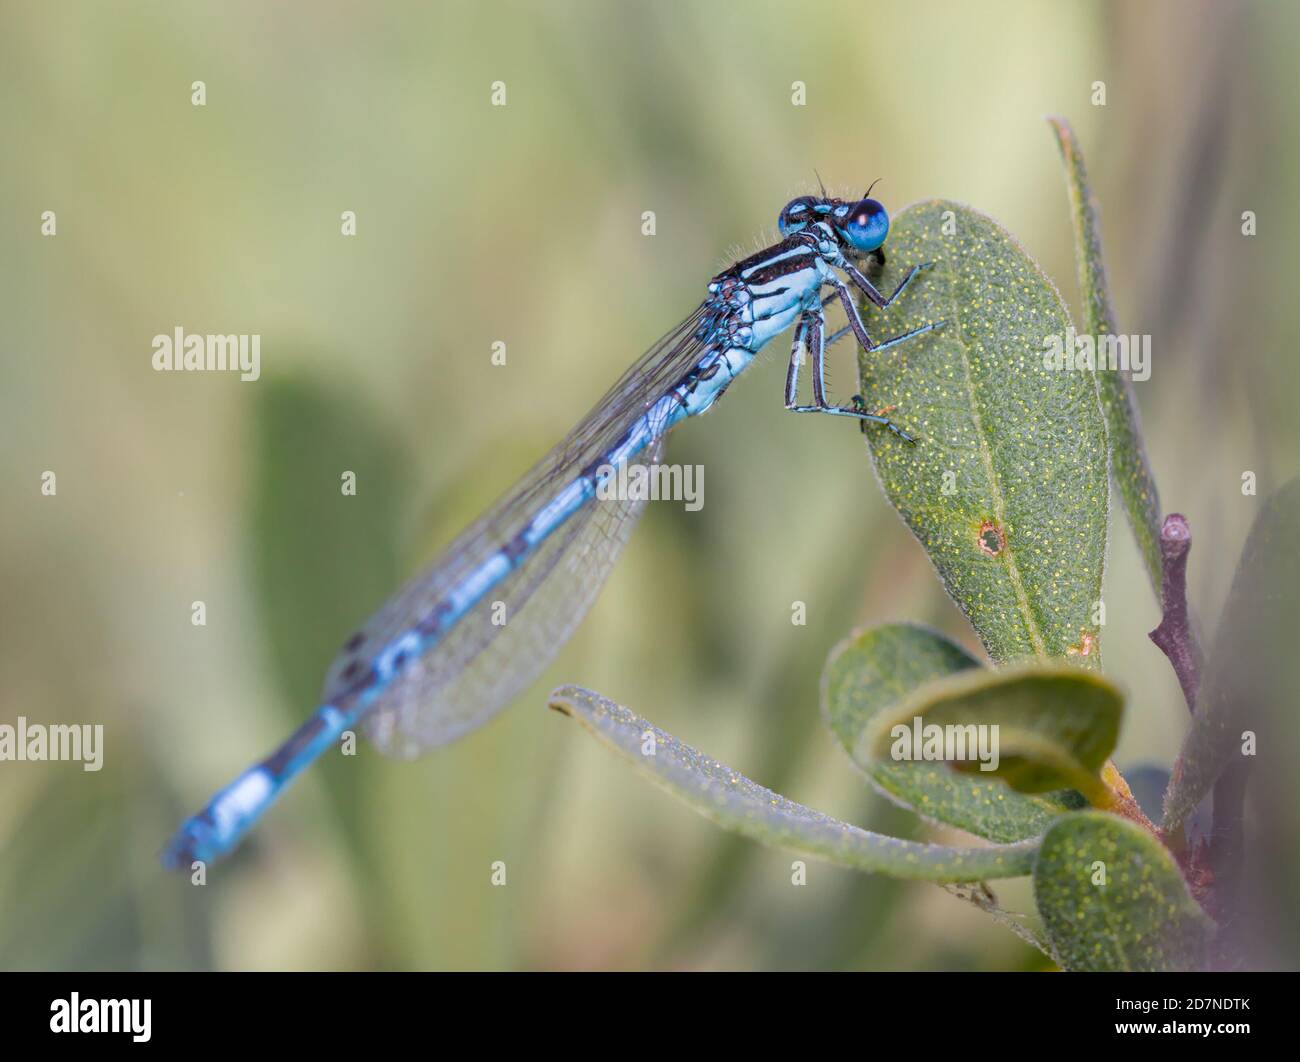 Rare Southern Damselfly, Coenagrion mercuriale, Perched On A Leaf, UK Stock Photo